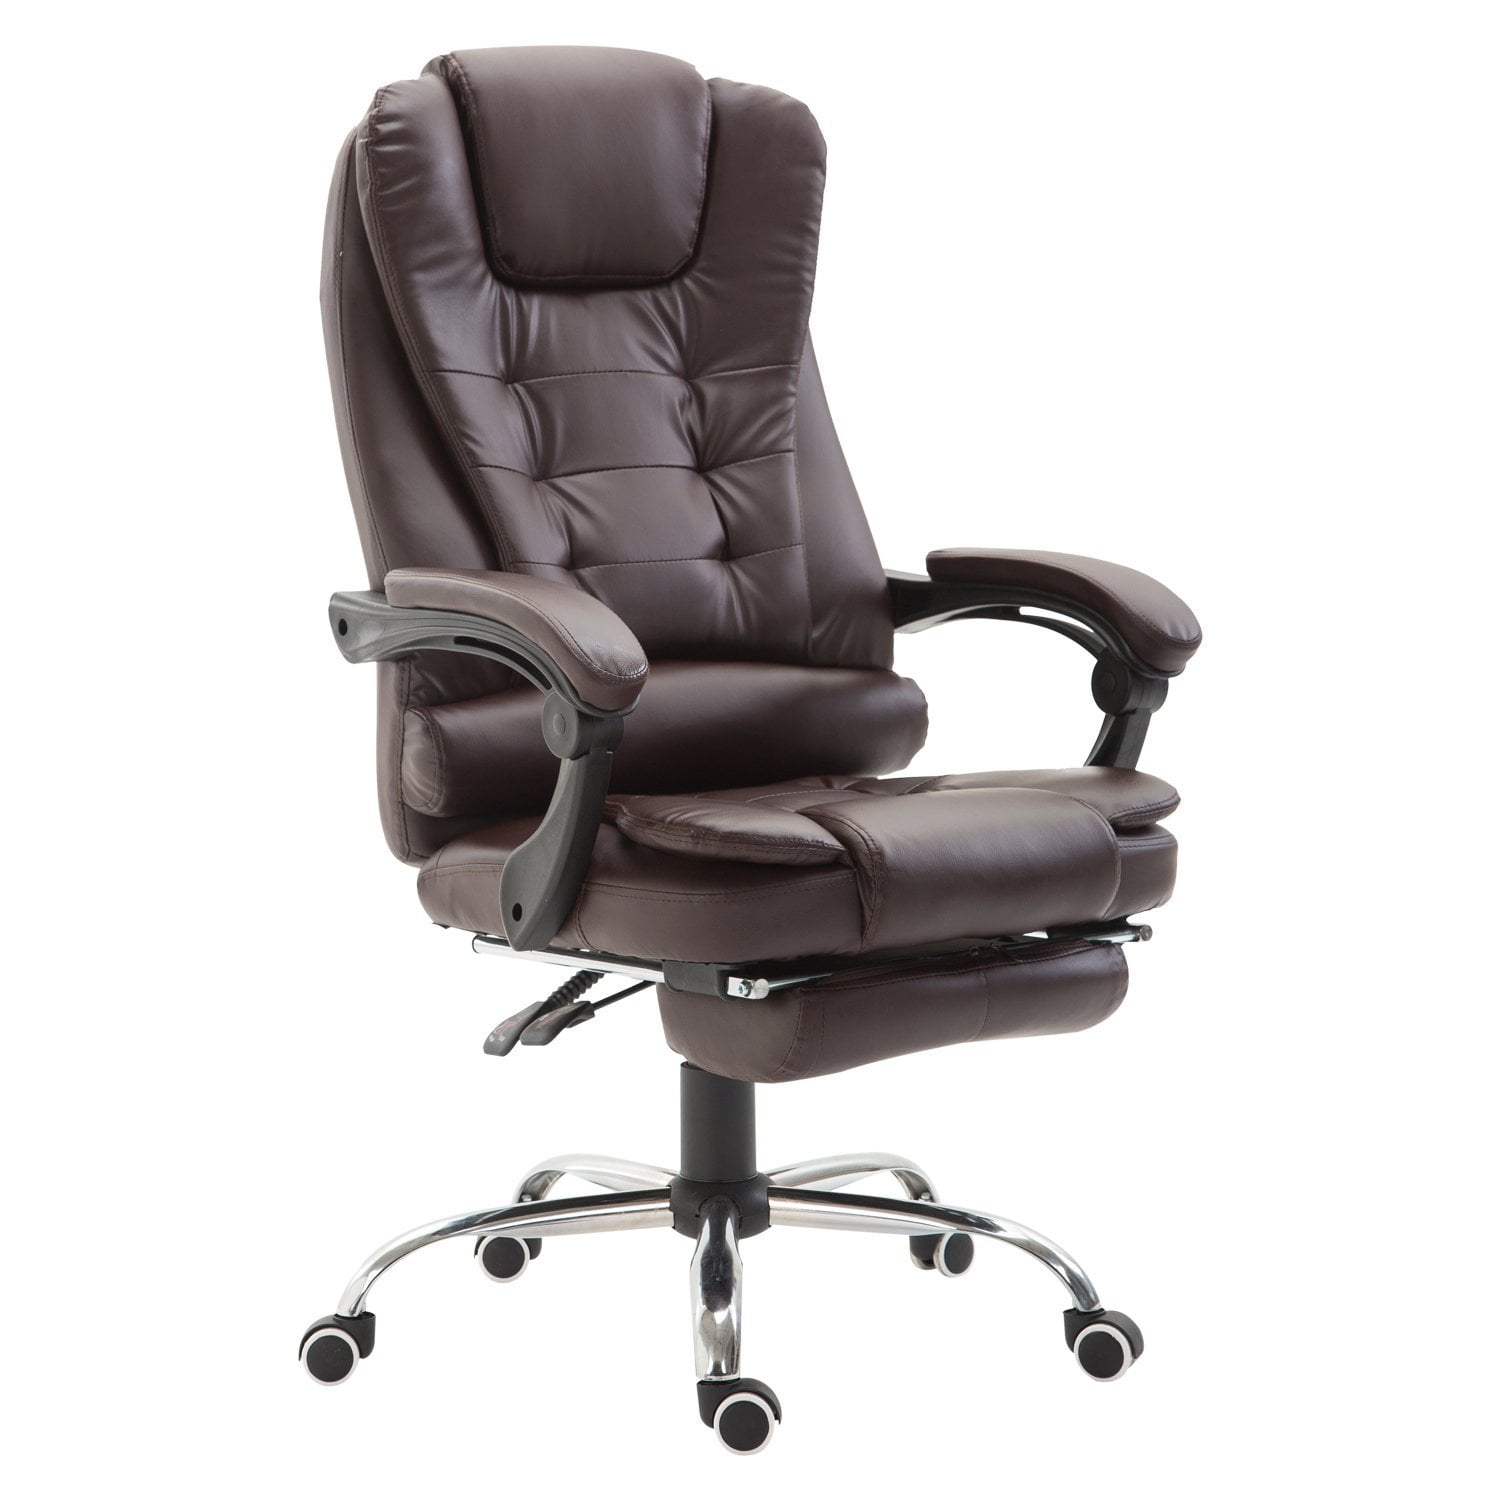 HOMCOM High Back Reclining PU Leather Executive Office Chair with